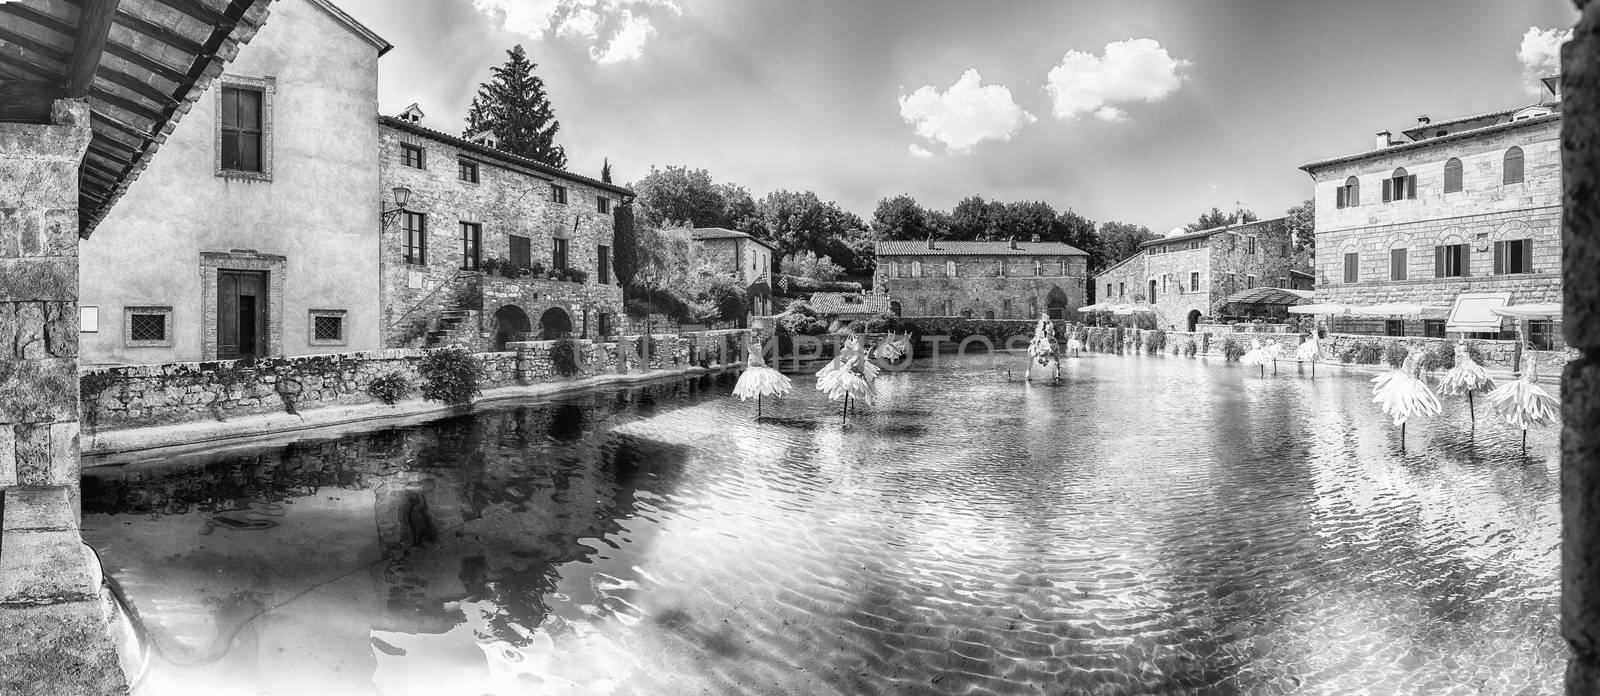 Panoramic view of the iconic medieval thermal baths, major landmark and sightseeing in the town of Bagno Vignoni, province of Siena, Tuscany, Italy